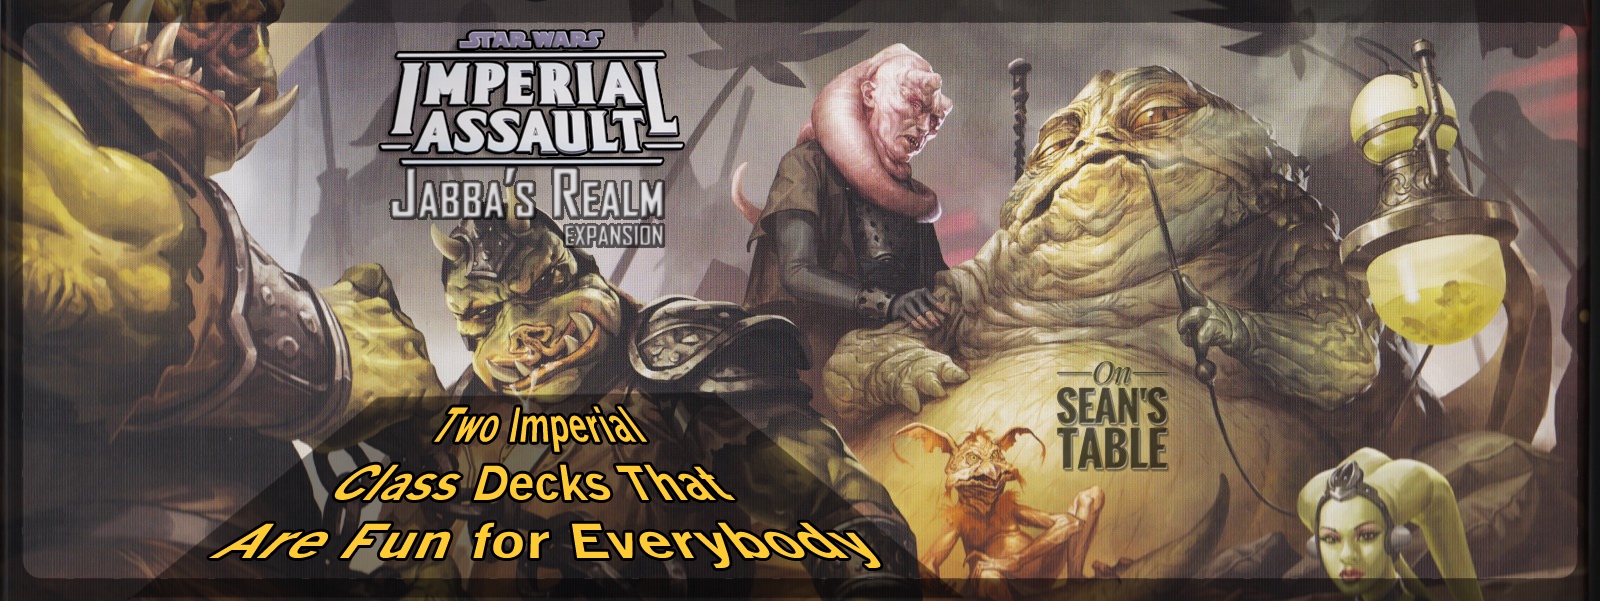 Imperial Assault Jabba's Realm Featured Image